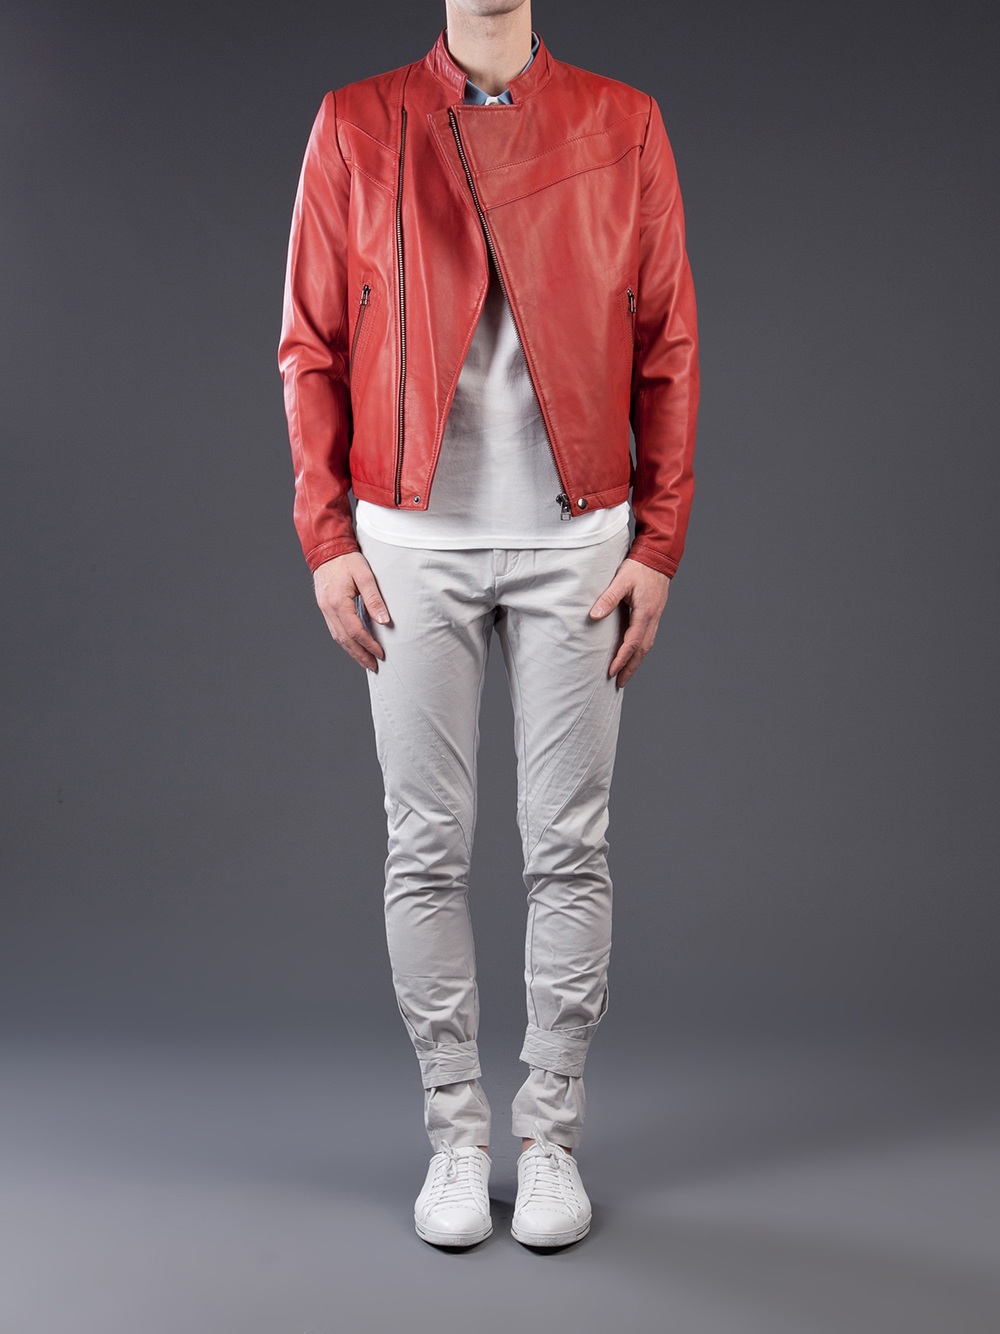 Adidas SLVR Leather Jacket in Red for Men - Lyst